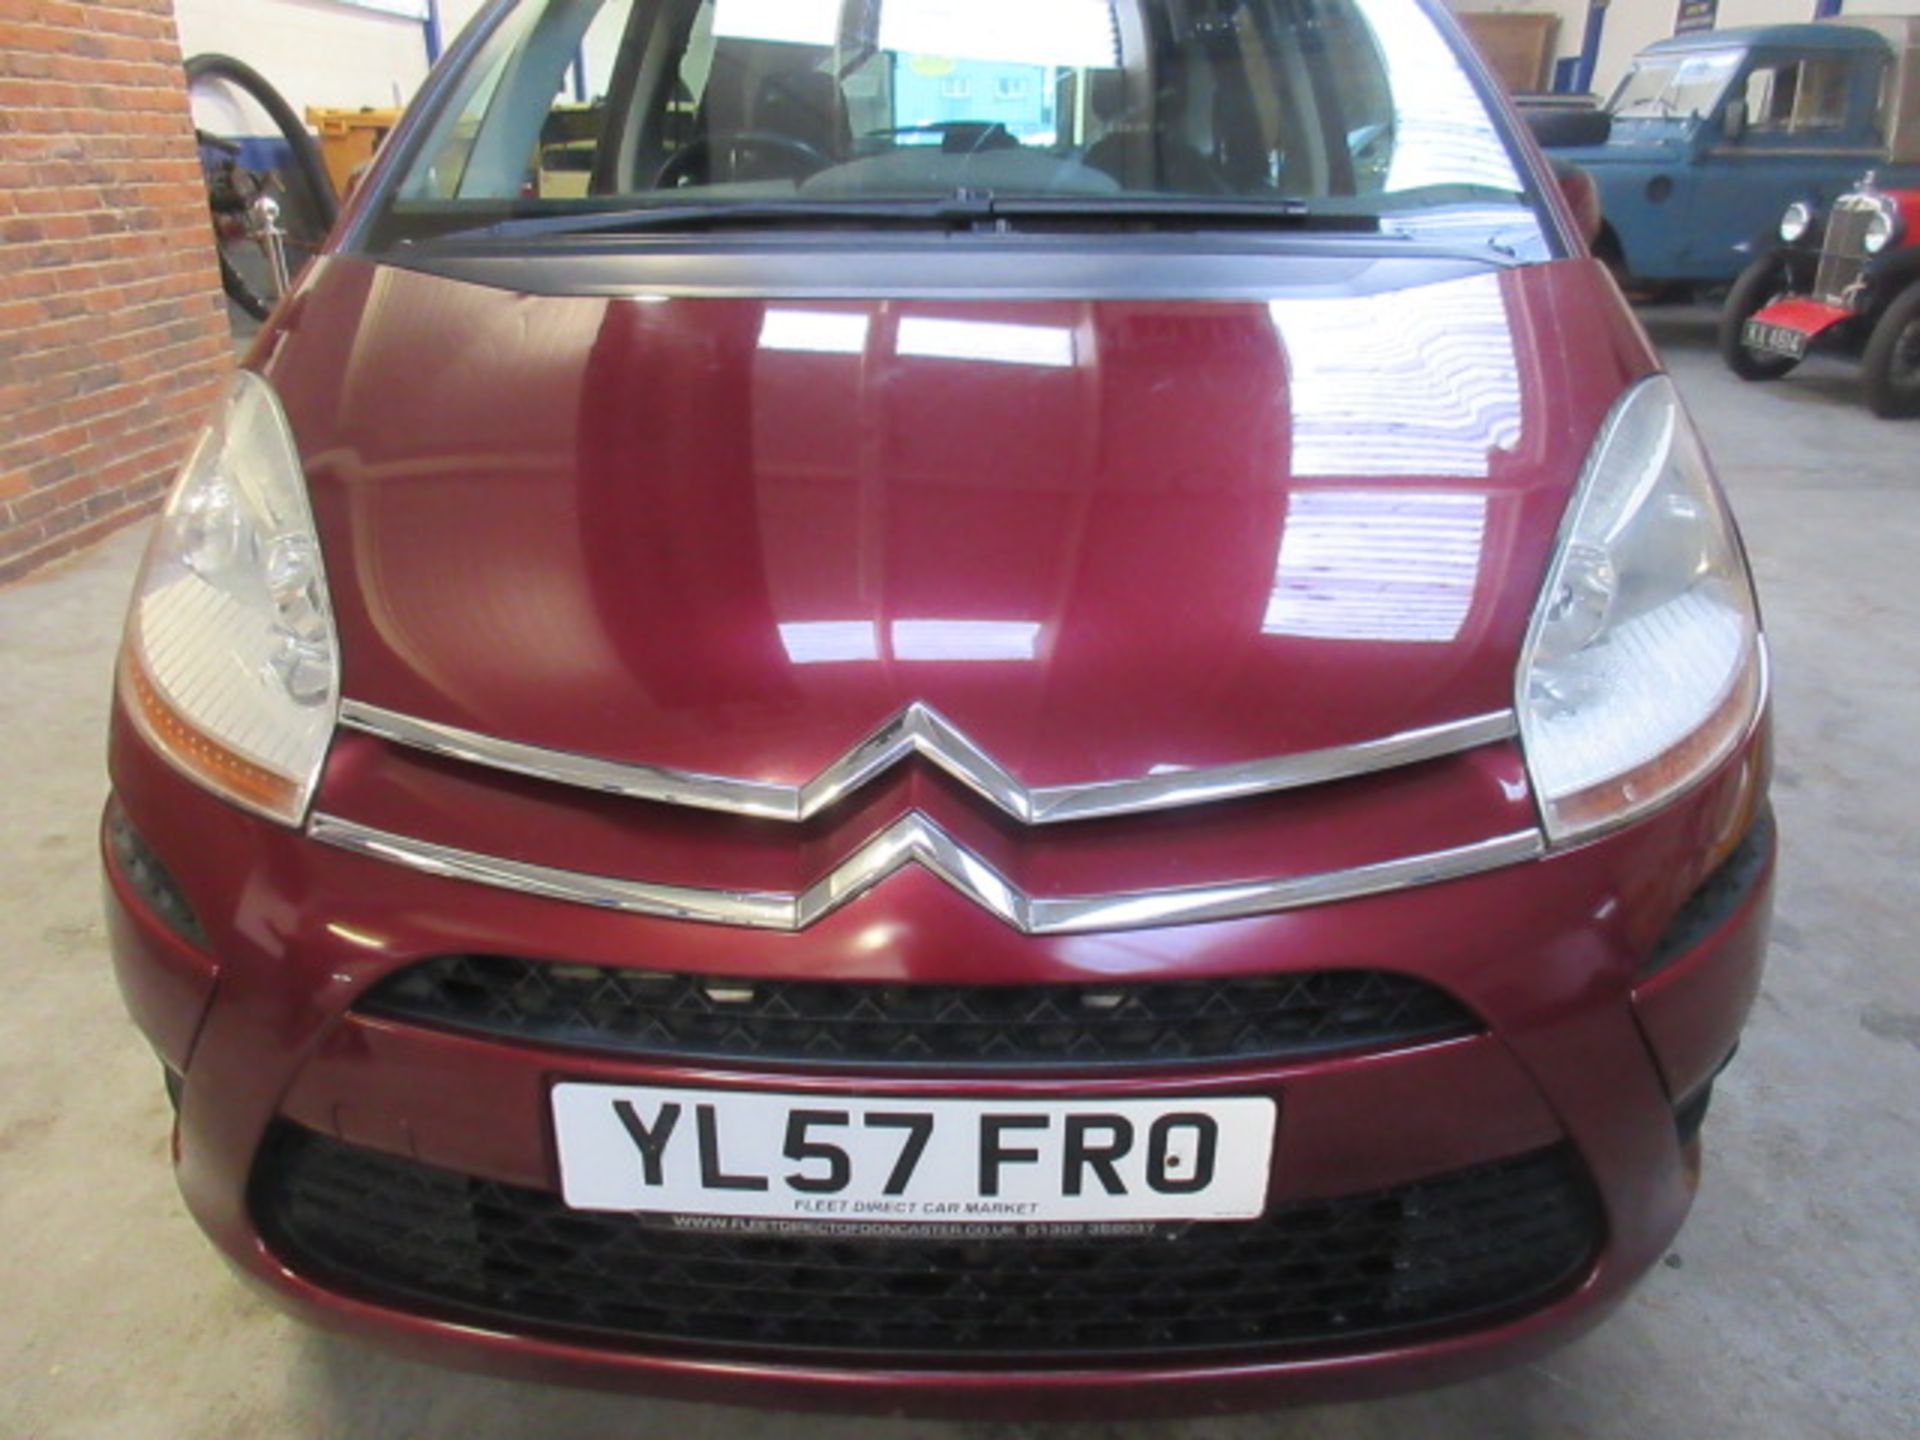 57 08 Citroen C4 Picasso VTR + HDI - Image 14 of 24